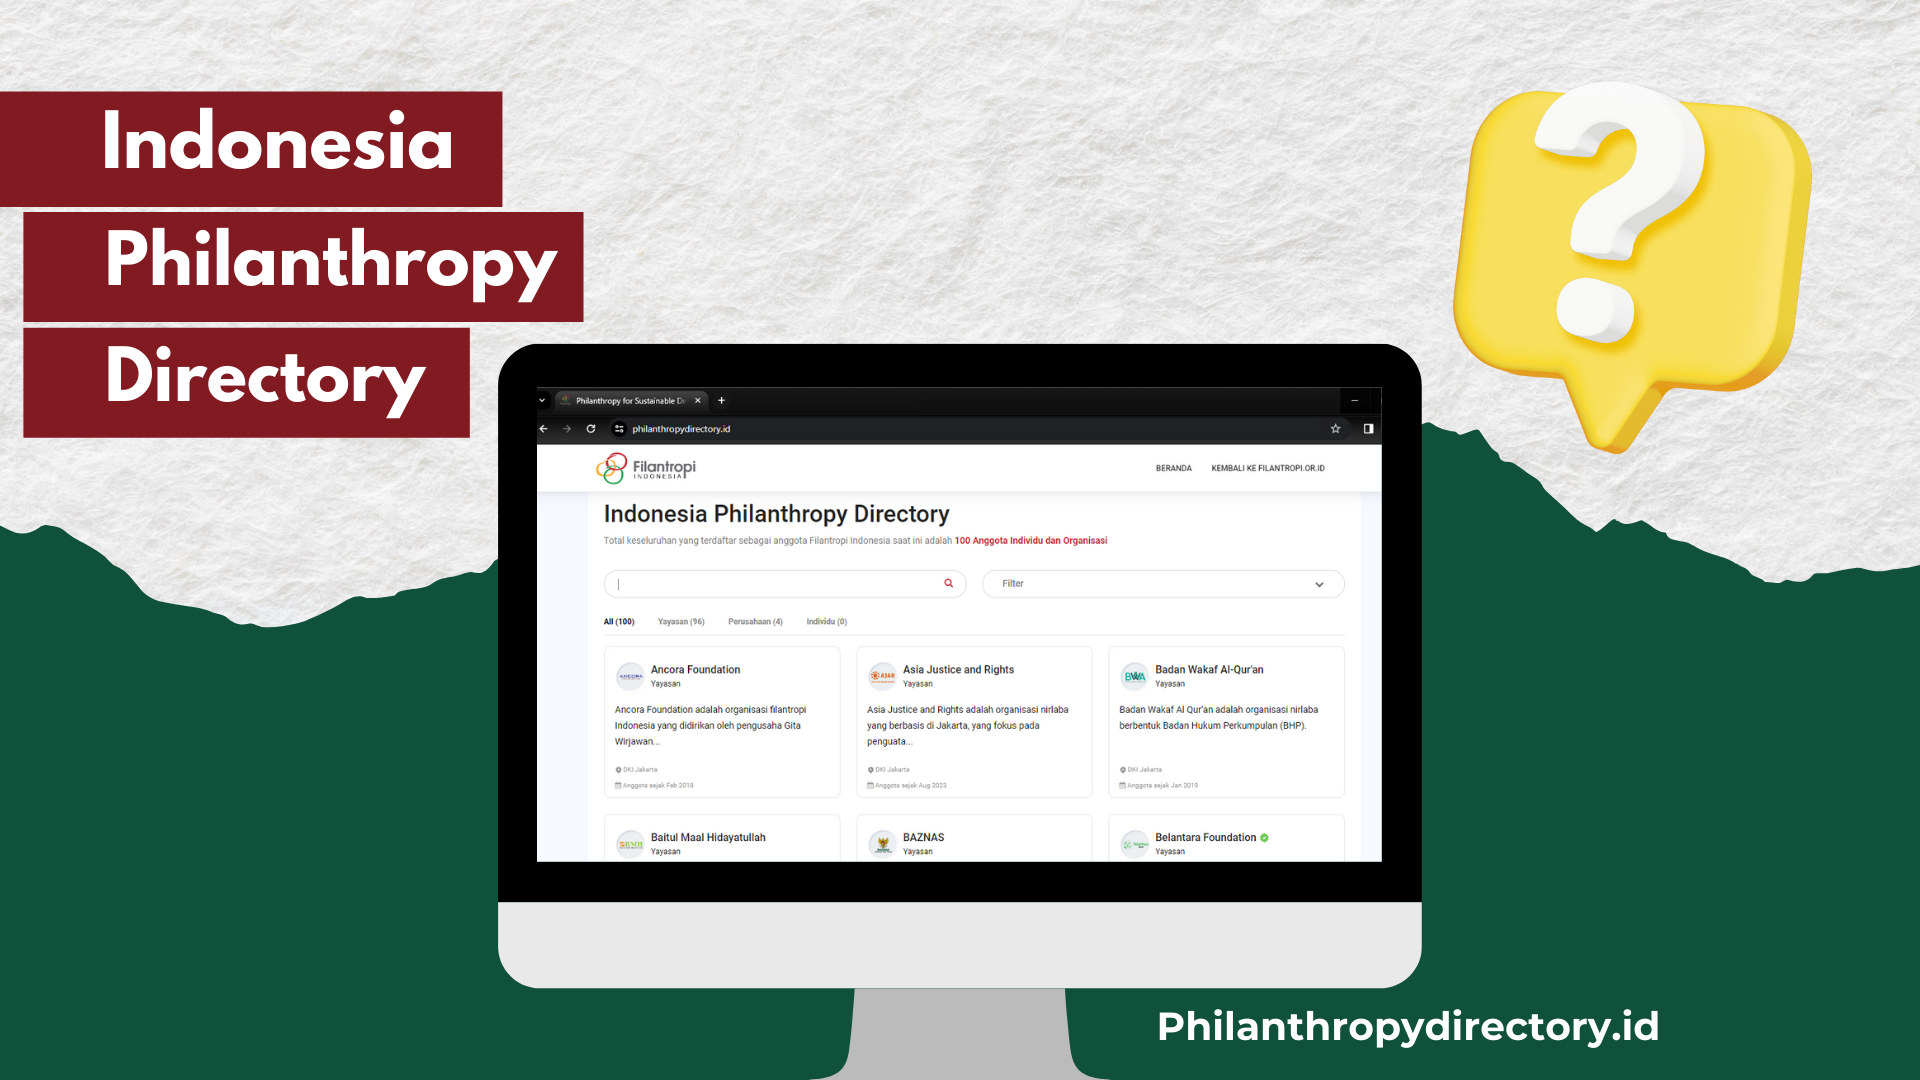 Introducing the Indonesia Philanthropy Directory as the Central Information Platform for Philanthropic Institutions in Indonesia